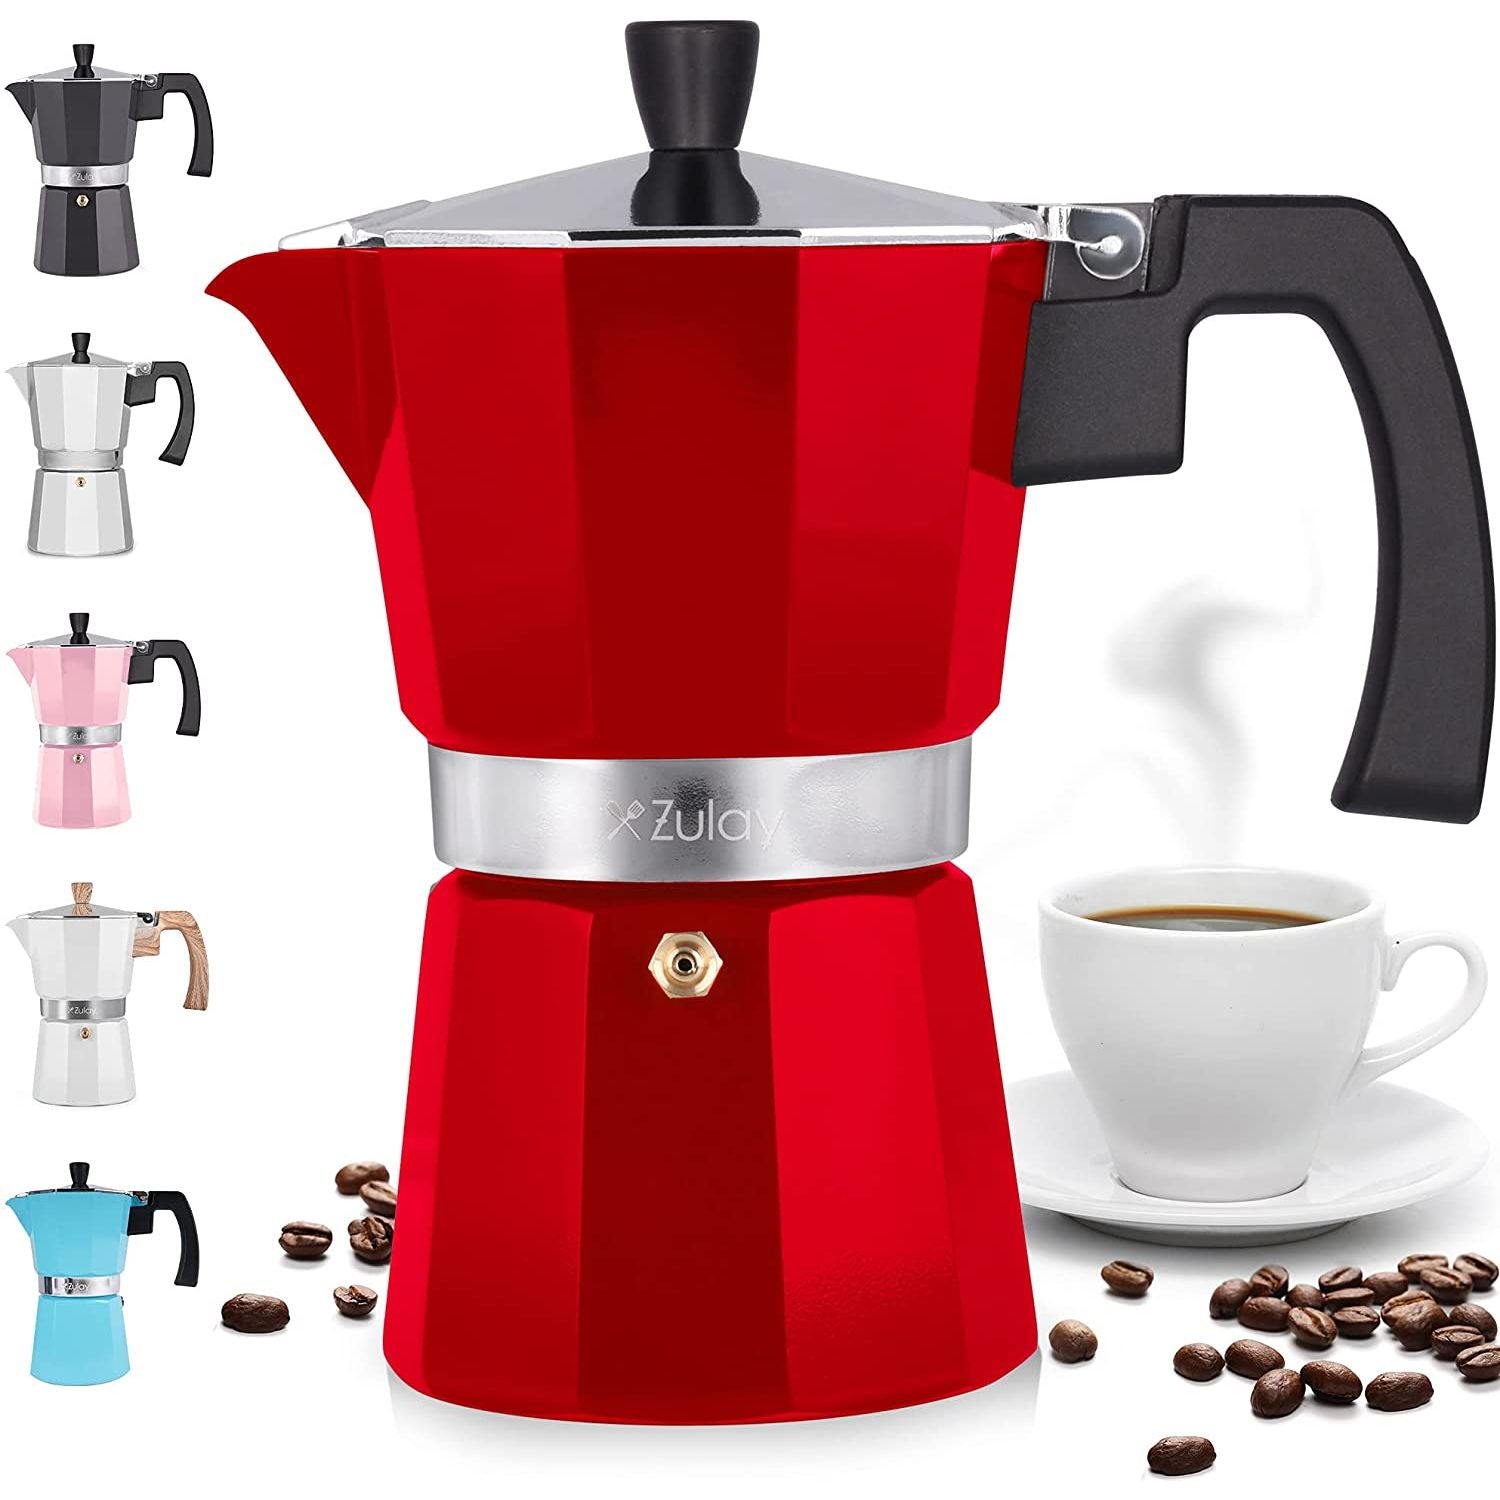 Navigating The Range Of Moka Pot Sizes (There Is No One-Size-Fits-All)